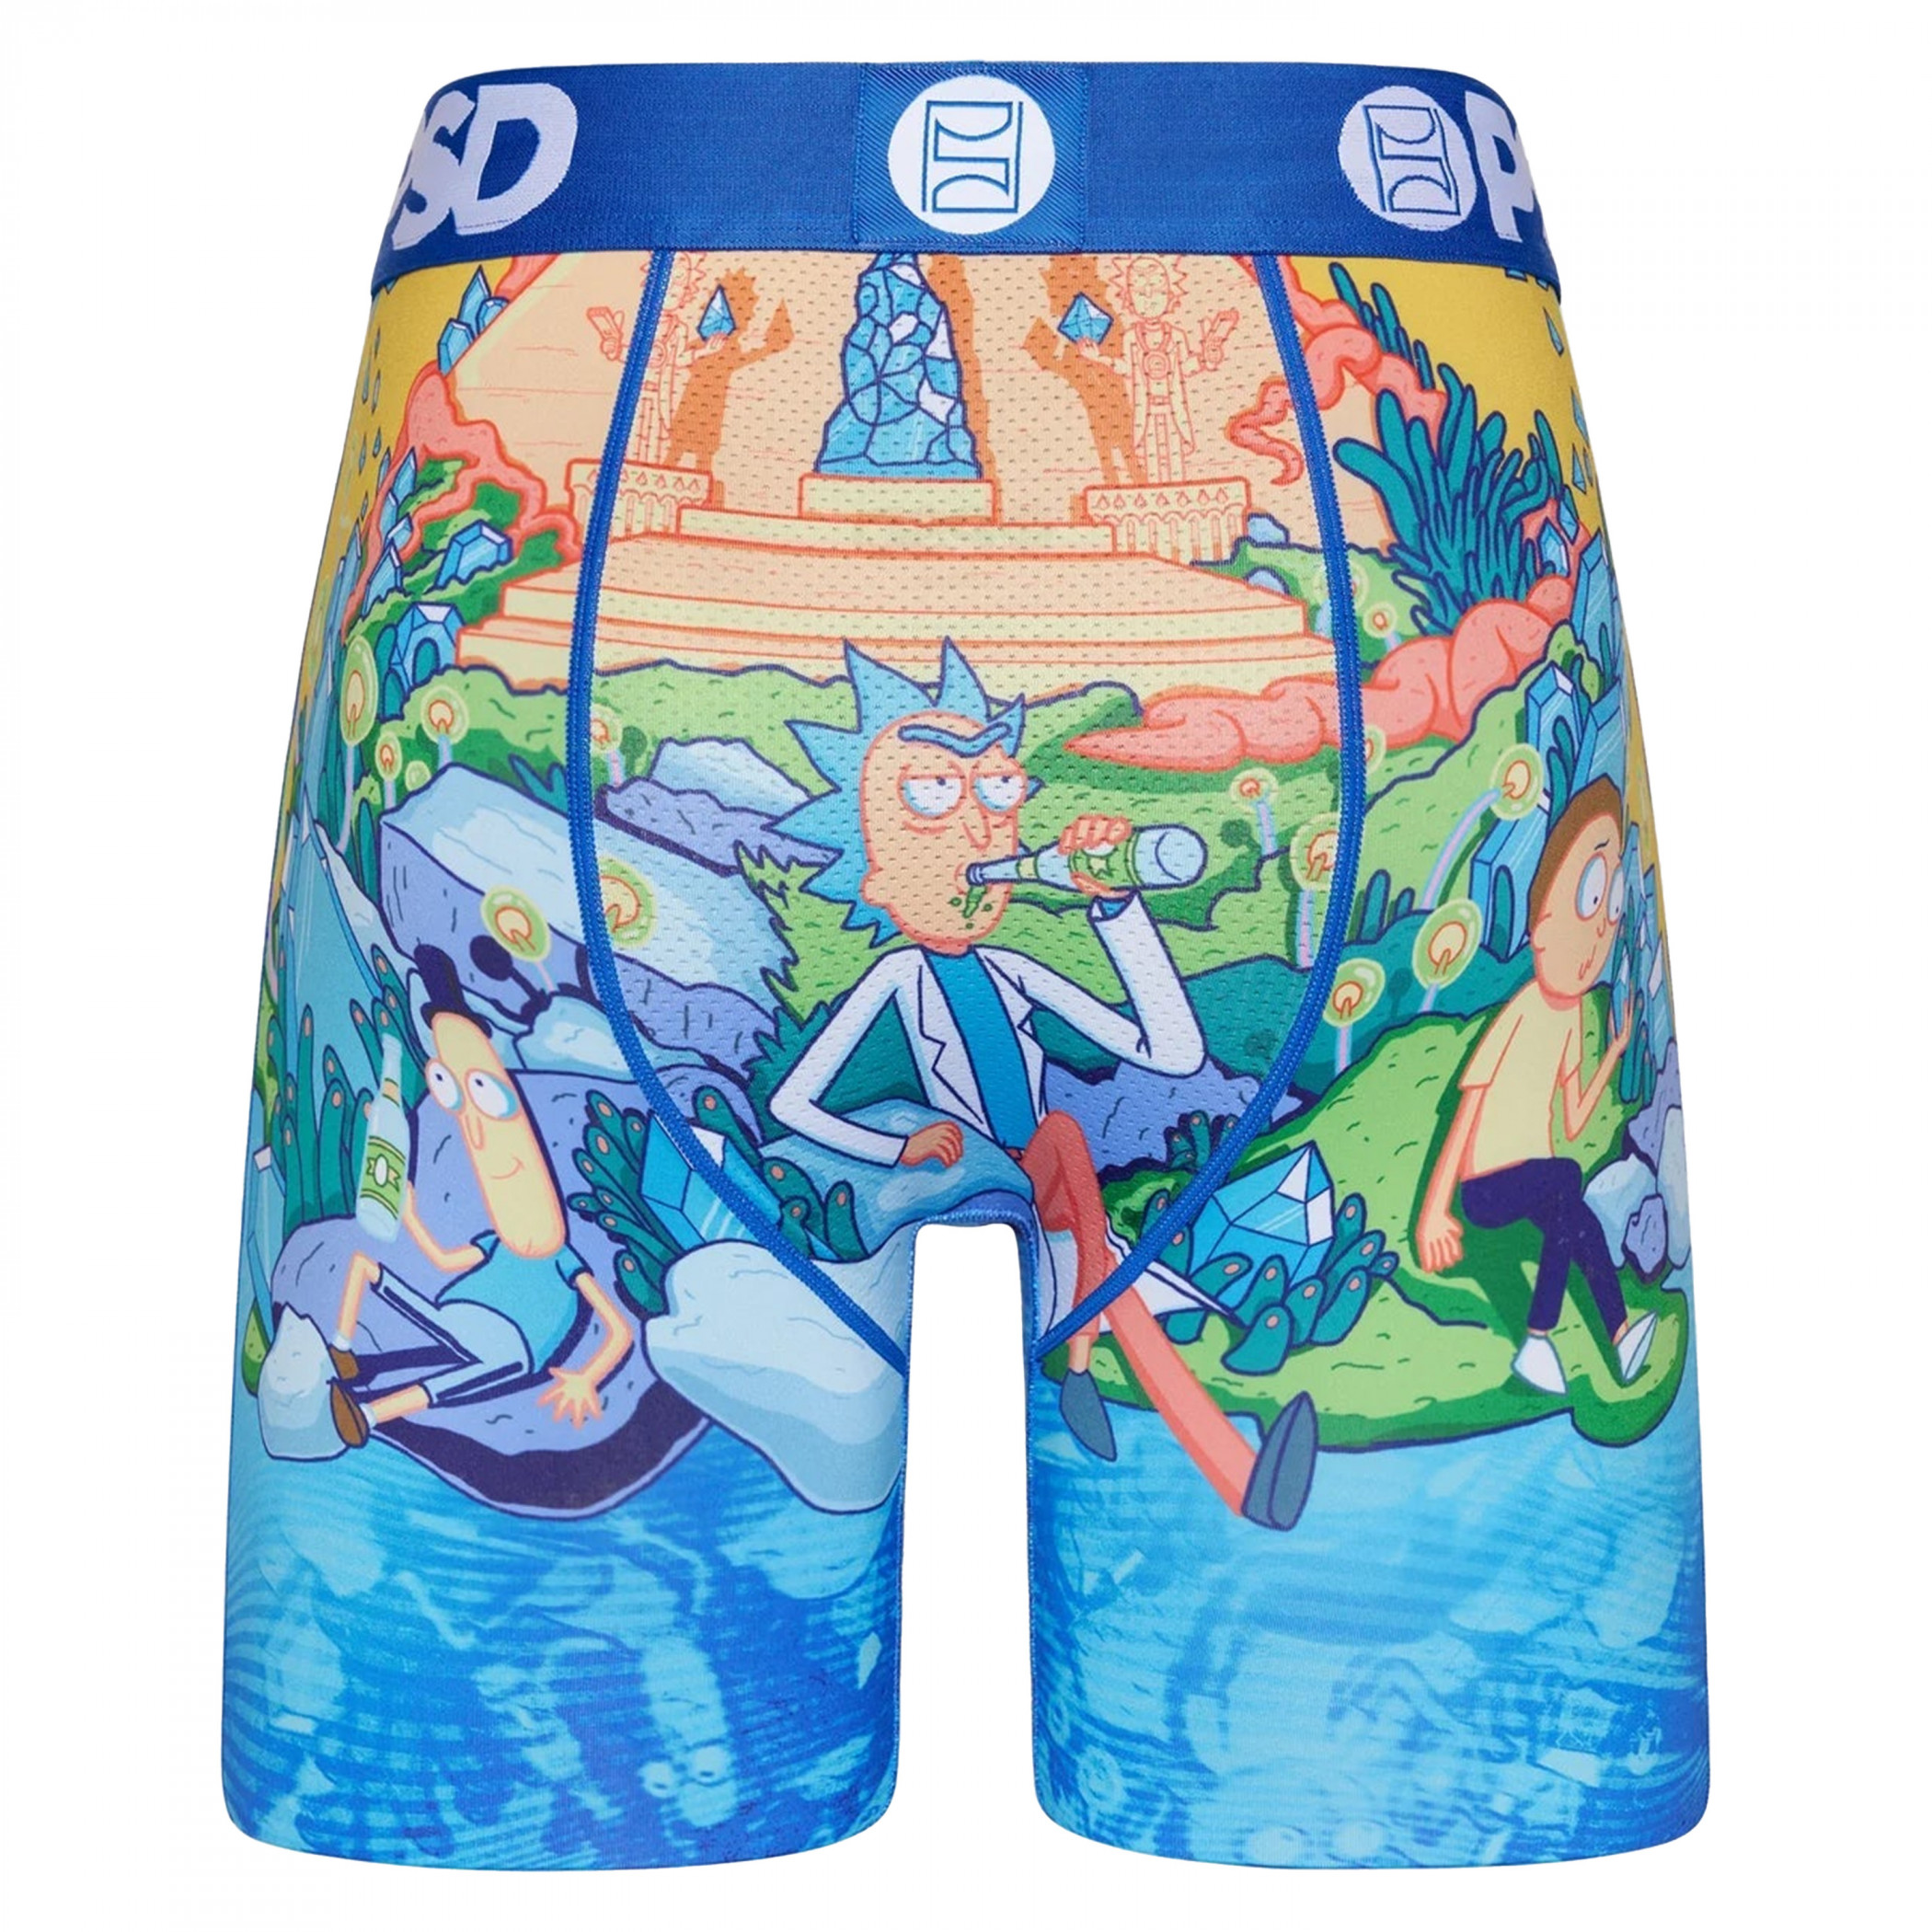 Rick And Morty Hangin' Around PSD Boxer Briefs